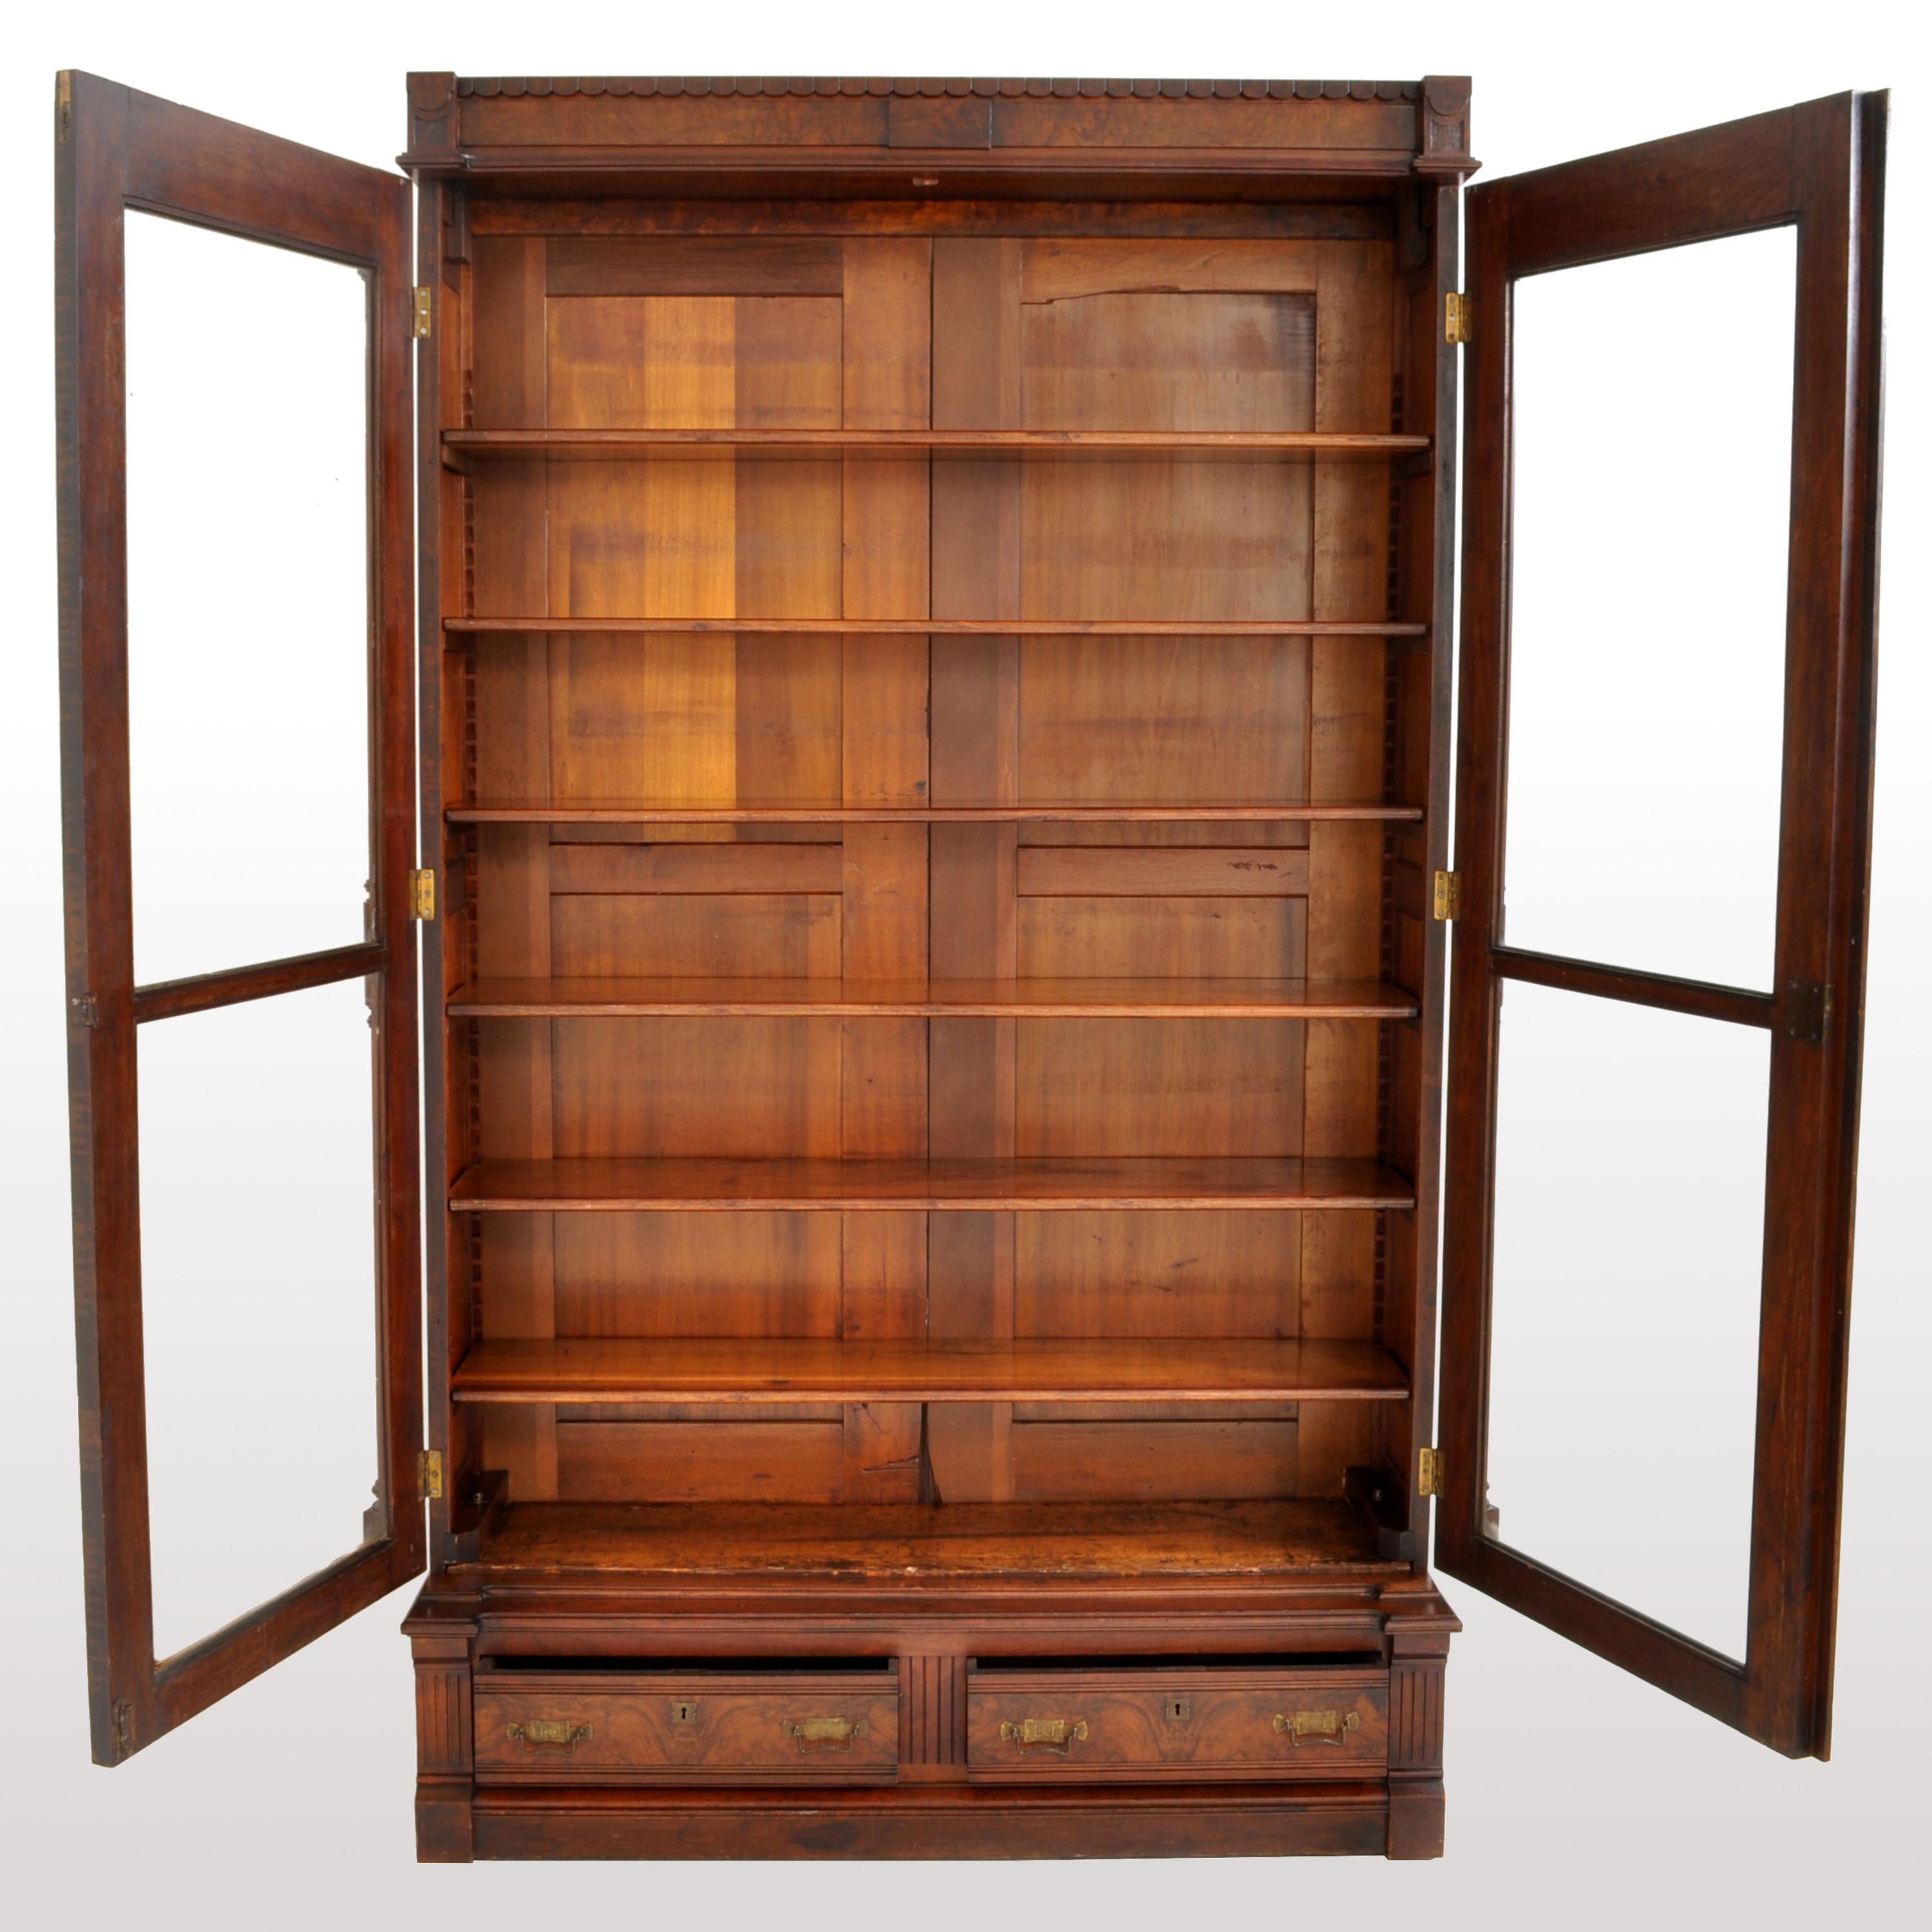 Late 19th Century Antique American Renaissance Revival Eastlake Carved Walnut Tall Bookcase, 1875